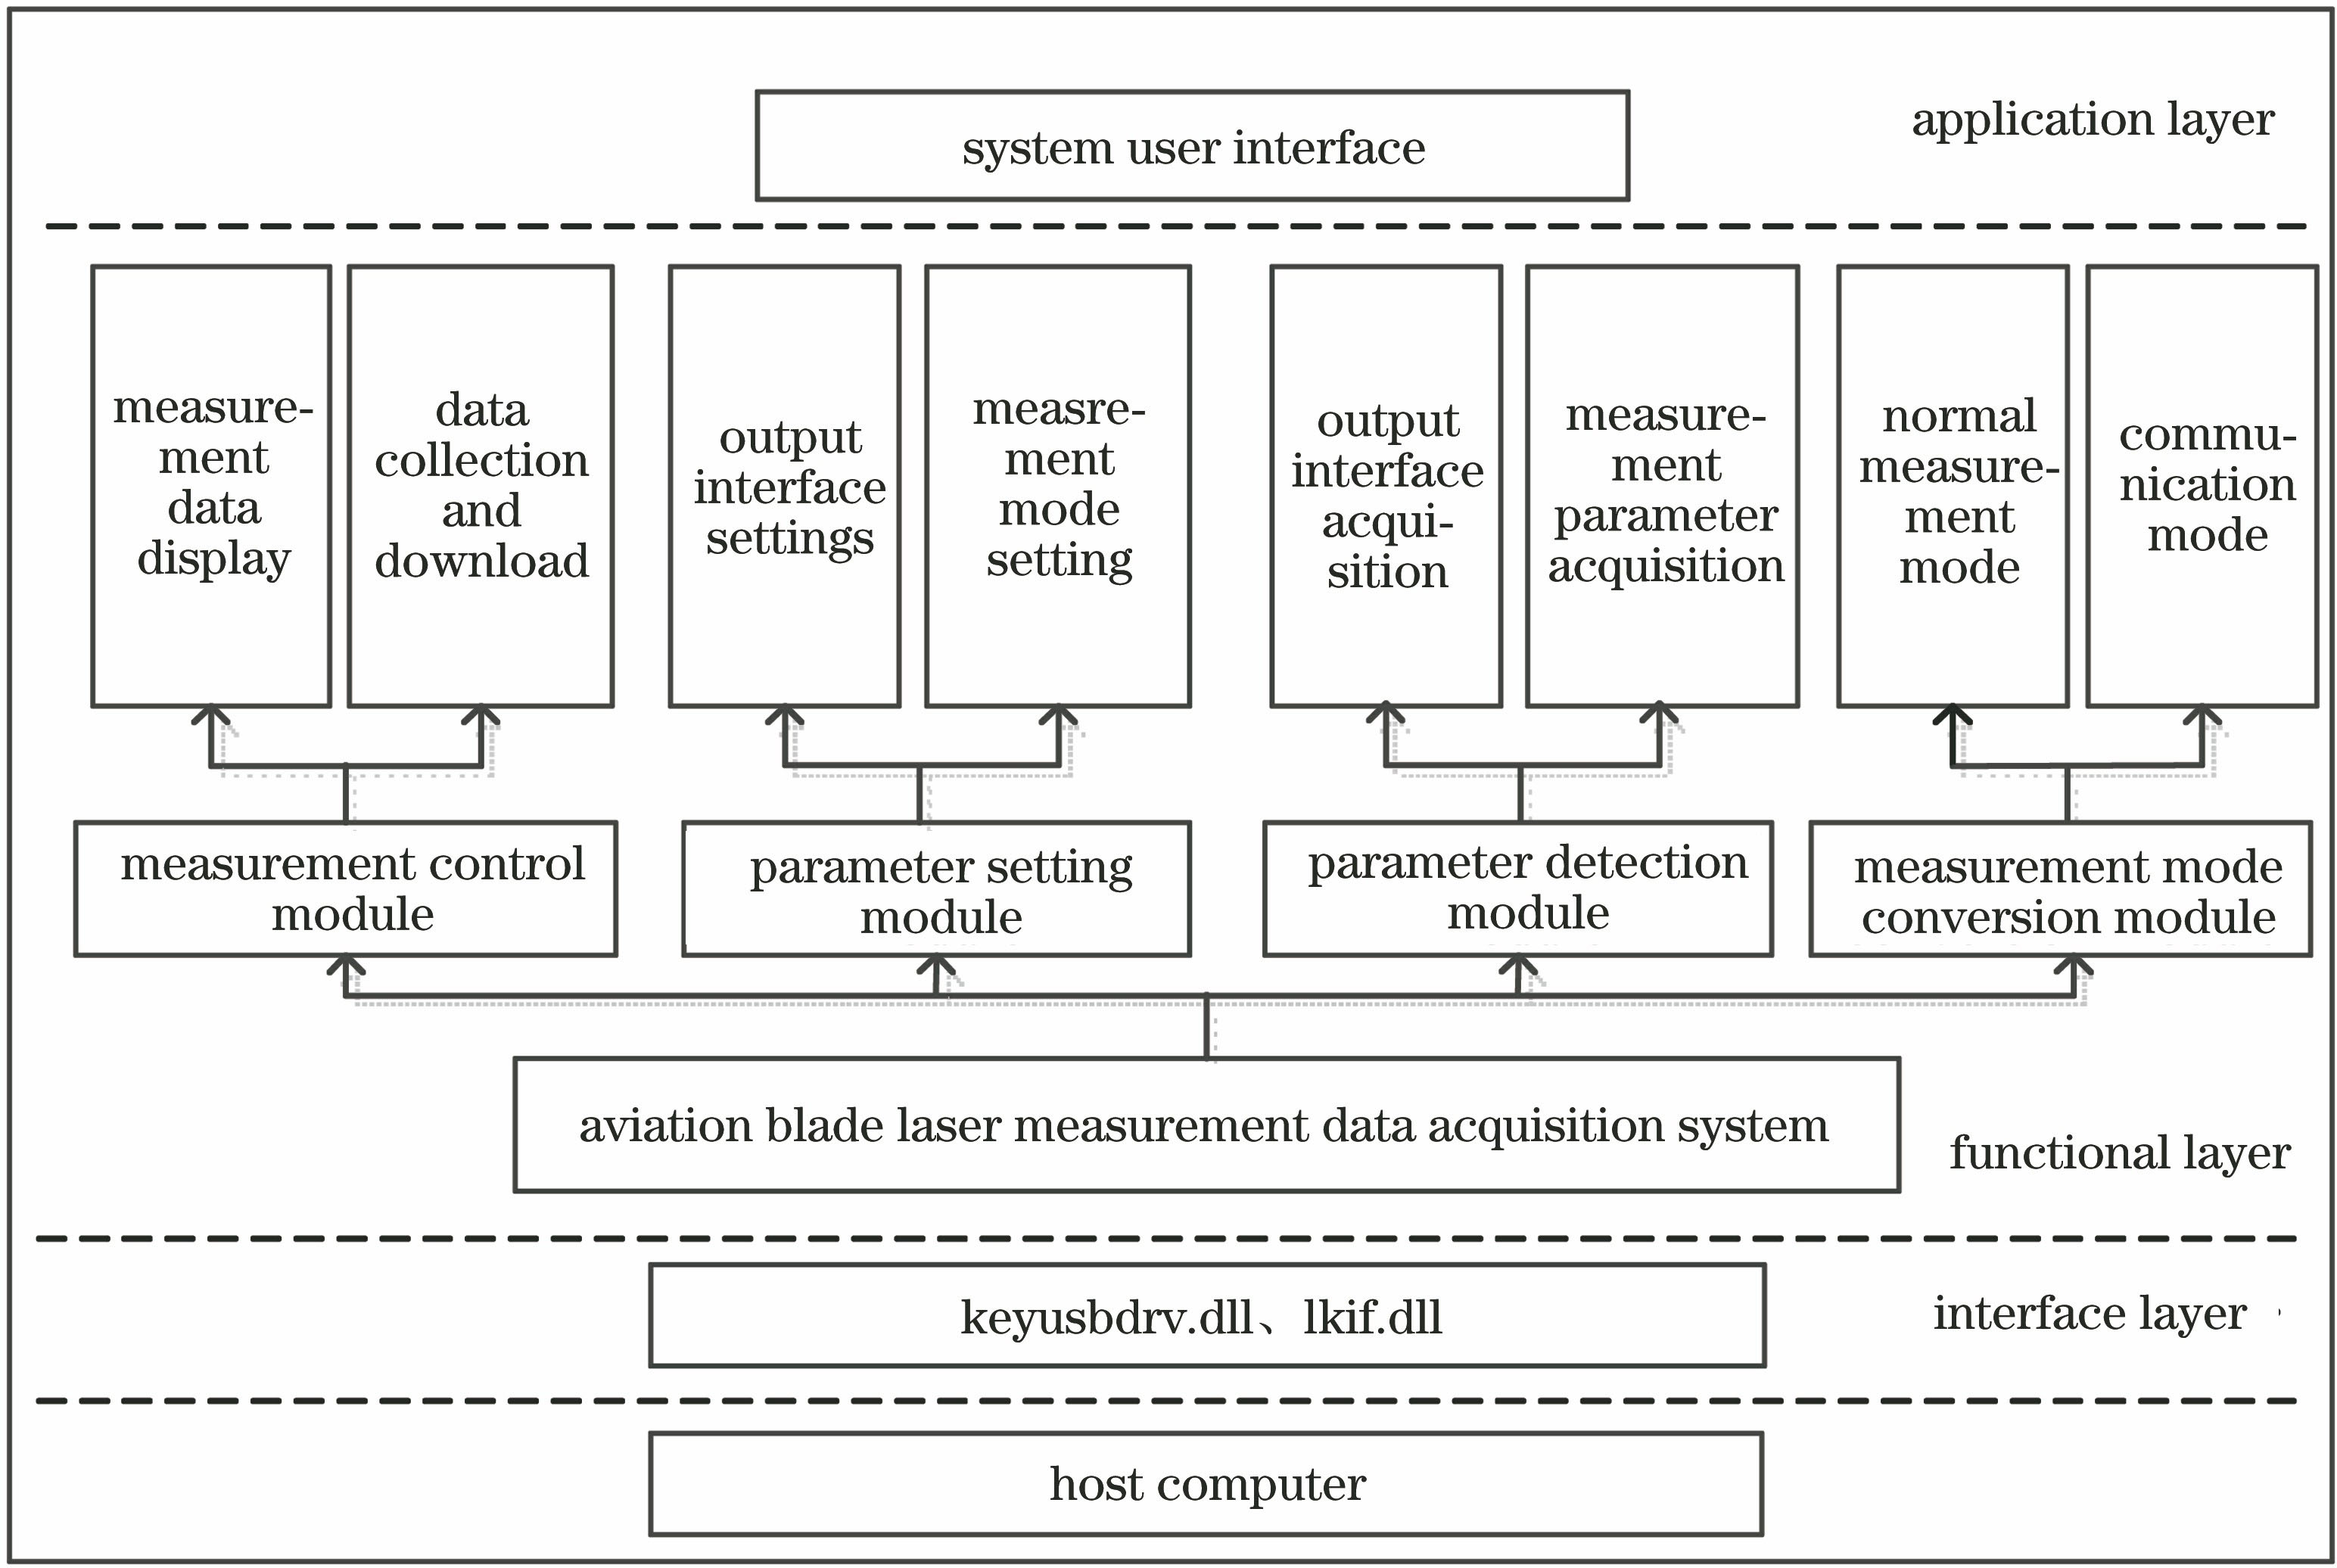 Functional map of the laser measurement data acquisition system